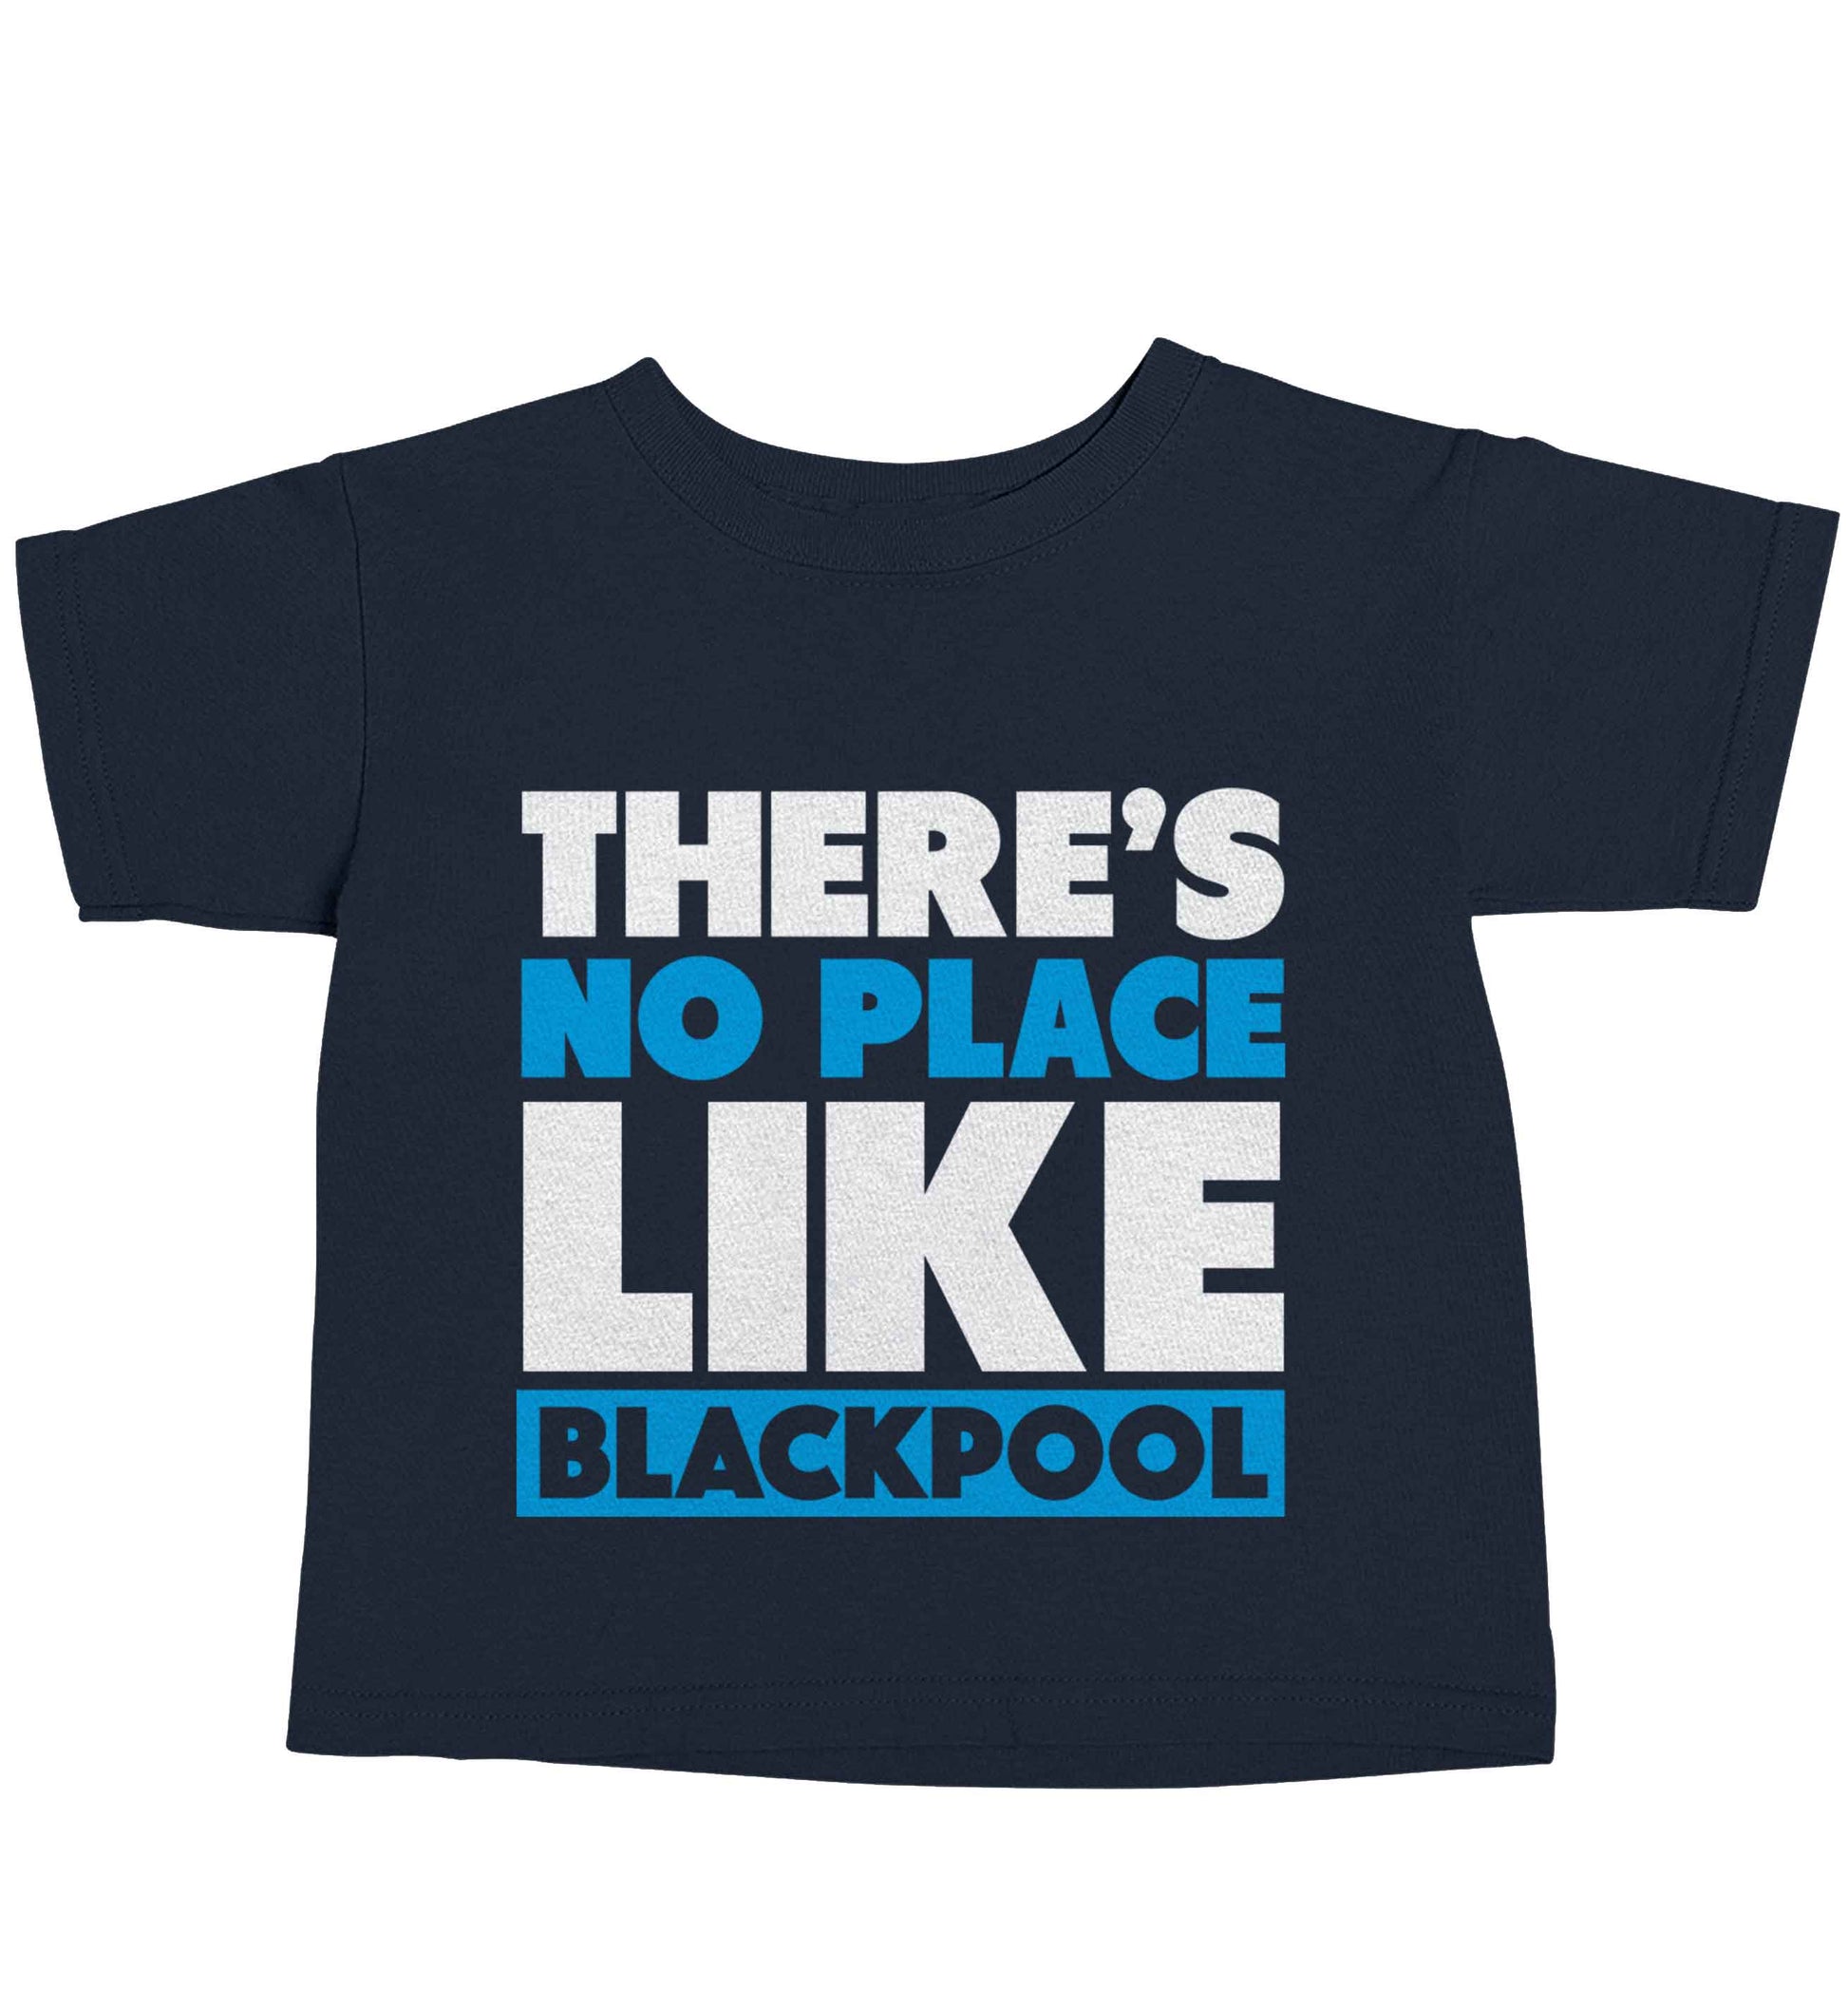 There's no place like Blackpool navy baby toddler Tshirt 2 Years